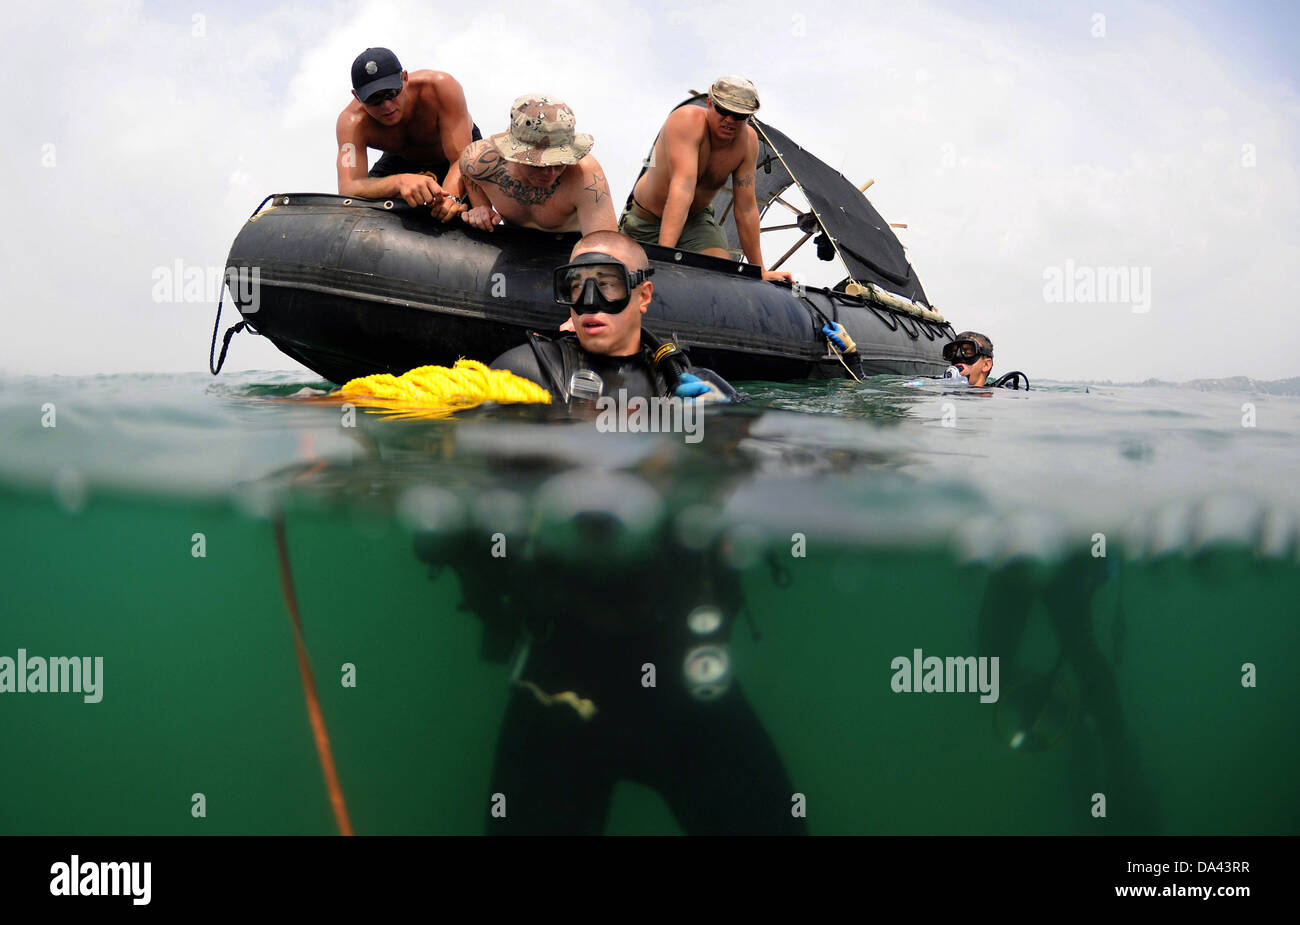 US Navy Divers before a recovery search dive during a Joint POW/MIA Personnel Accounting Command recovery mission May 30, 2010 in Quynh Phuong, Vietnam. The mission of the JPAC is to account of all Americans missing as a result of the nation's past wars. Stock Photo